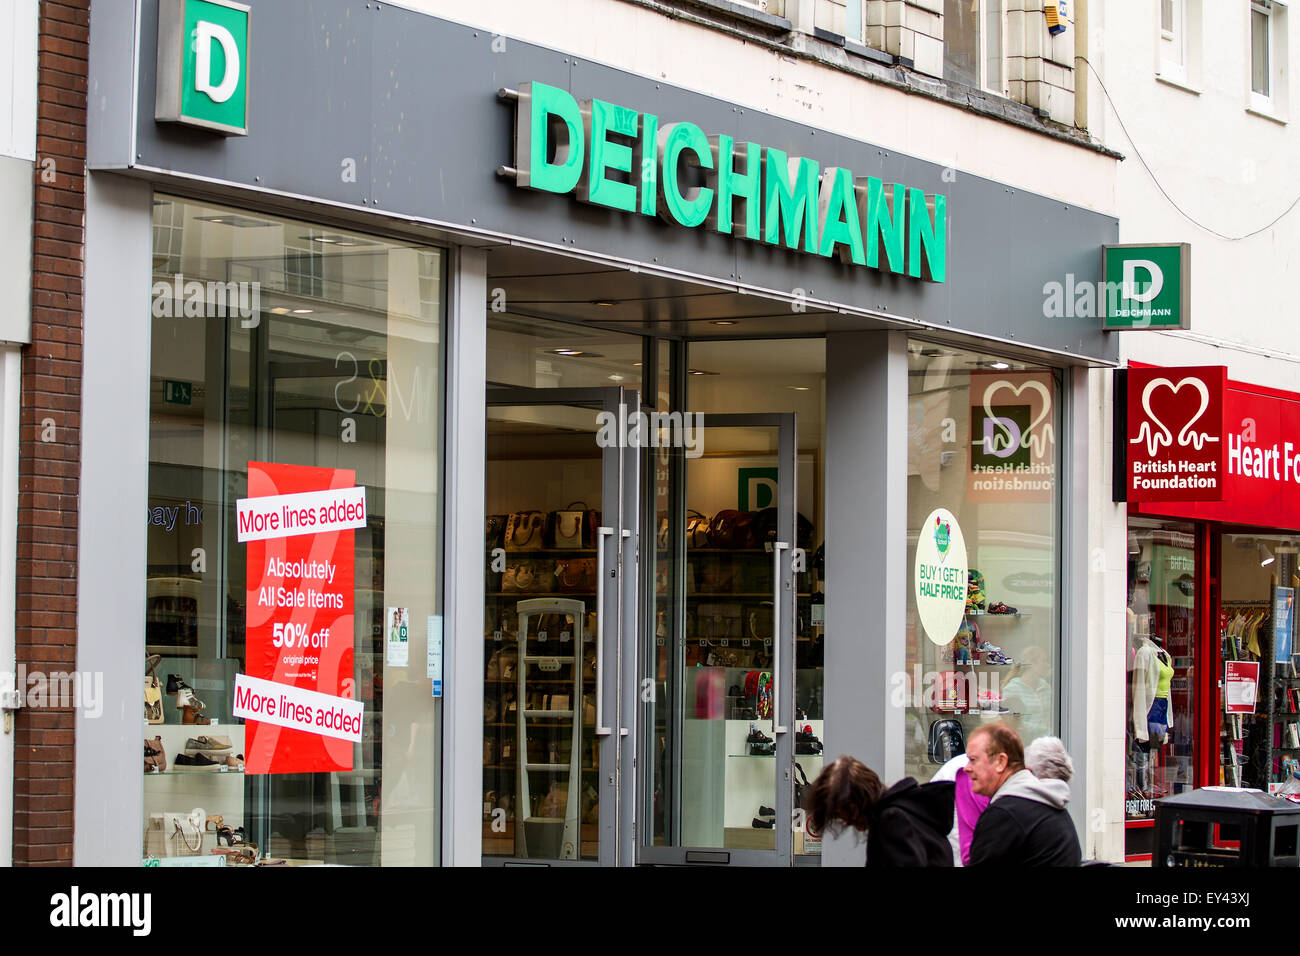 Dundee, Scotland, UK. 21st July, 2015. Sales: Mid Summer Sales in Dundee.  German shoe company Deichmann along the Murraygate advertising summer sales  50% reductions on their products. The Heinrich Deichmann-Schuhe GmbH &